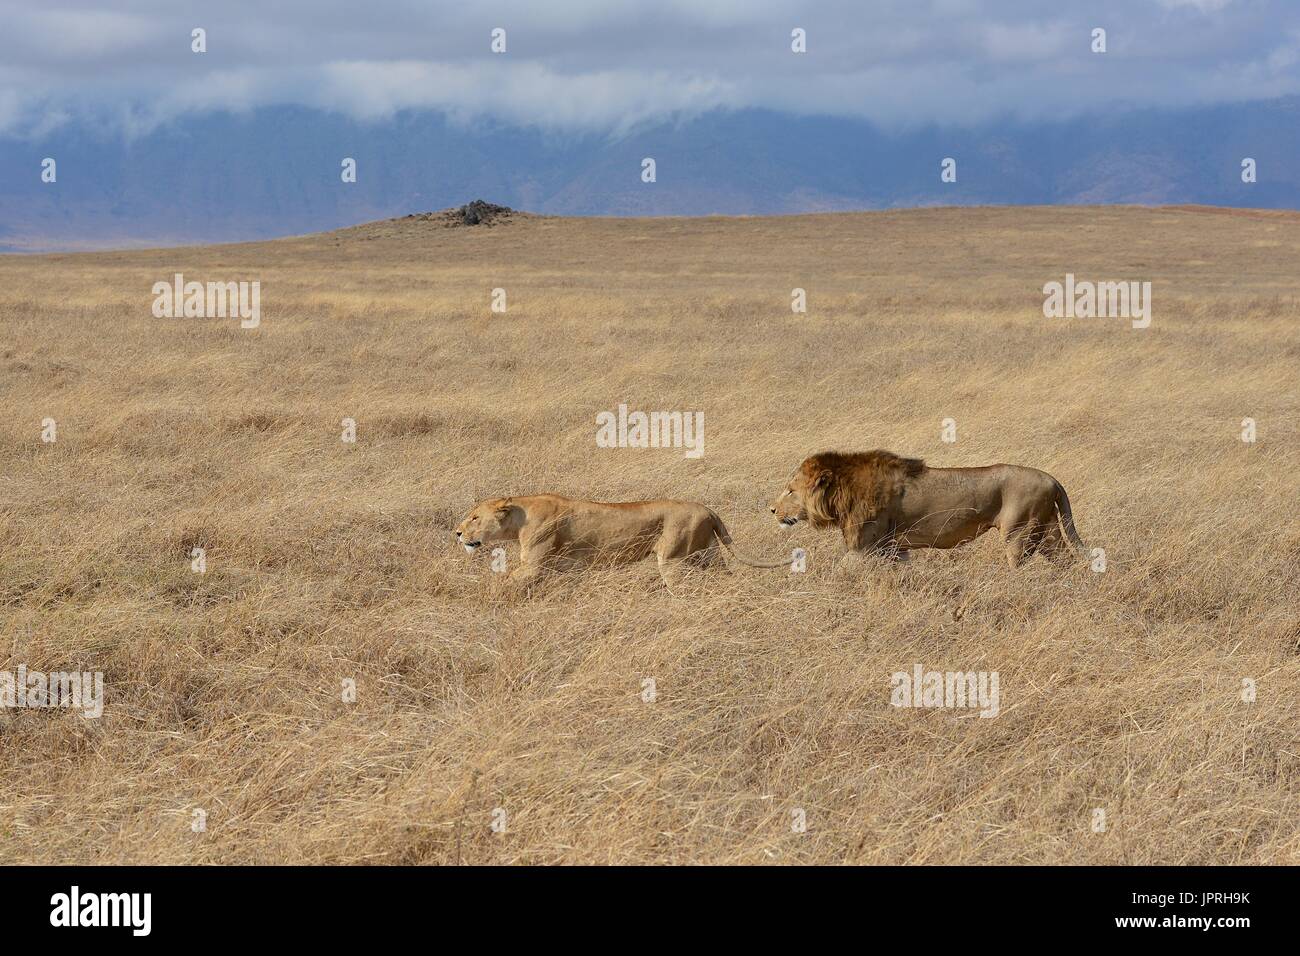 Lions are king of the savanna in the Serengeti National Park of Tanzania, Africa. Stock Photo